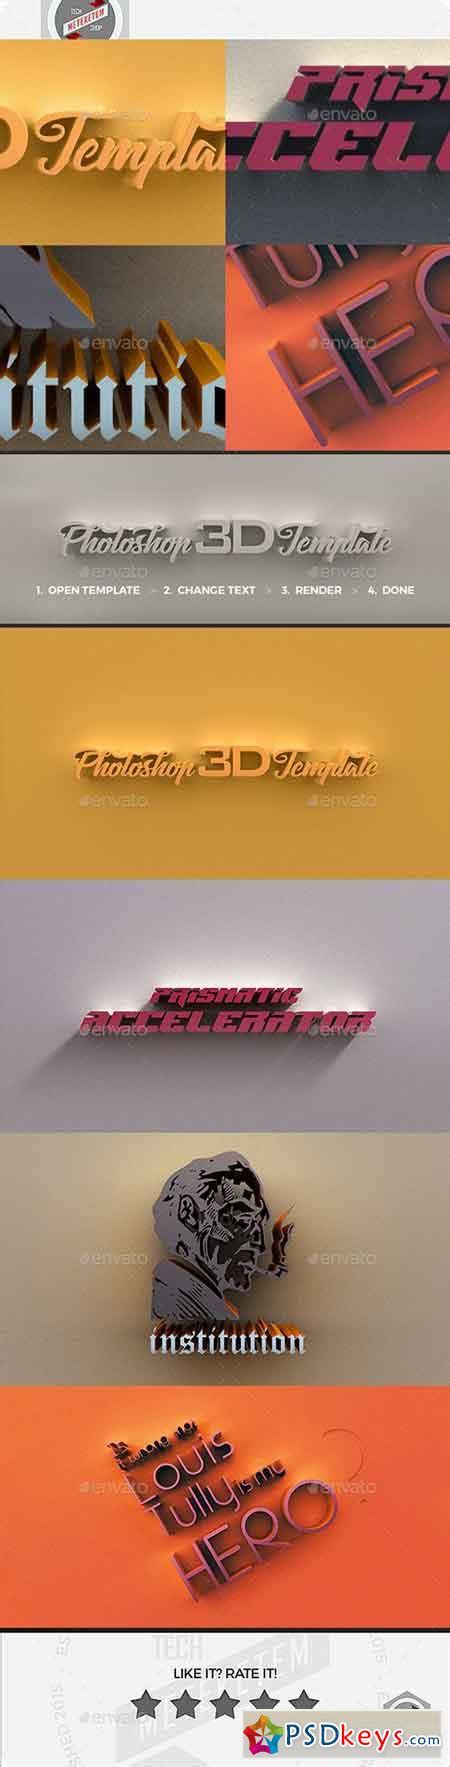 3d Photoshop Template 3 20234918 Free Download Photoshop Vector Stock